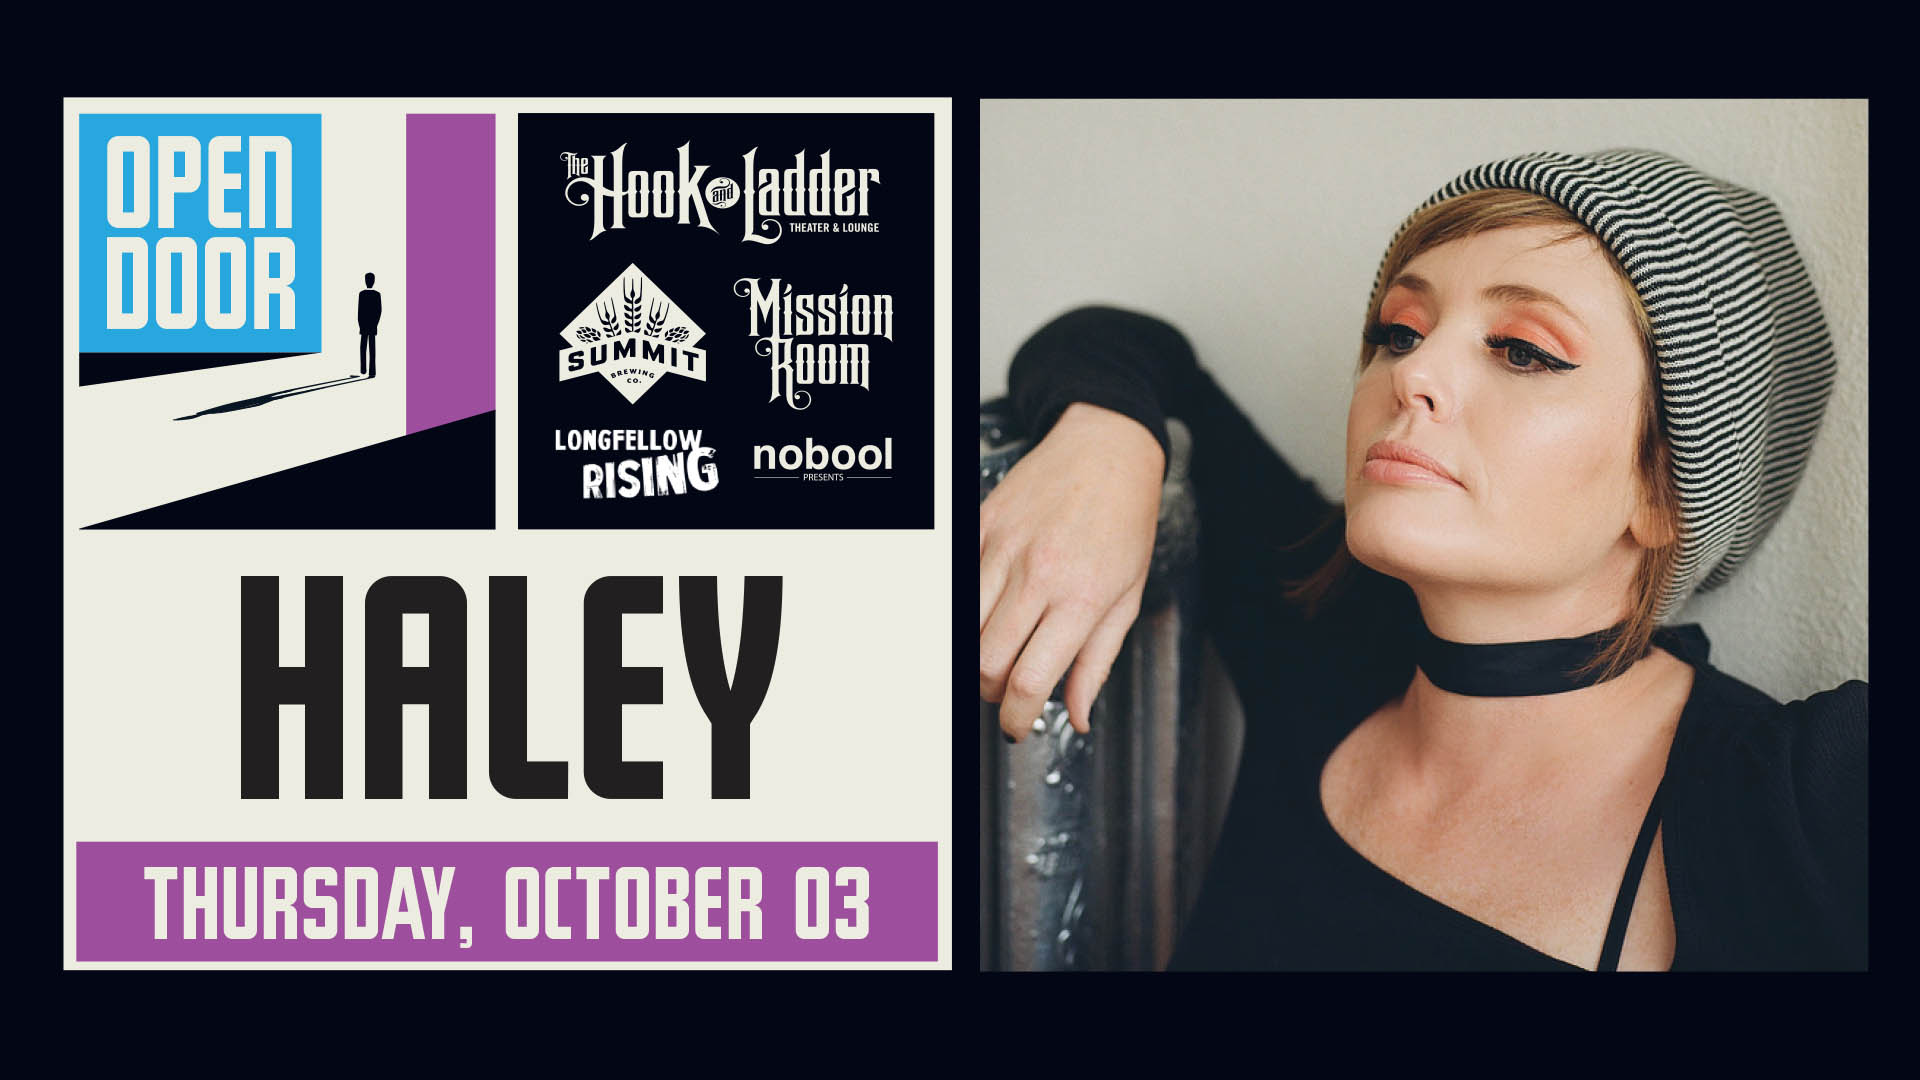 Summit Brewing & Longfellow Rising presents Open Door Series: HALEY Thursday, October 3 at The Hook and Ladder's Mission Room Doors 5pm :: Music 7-10pm :: 21+ FREE $5.01 Online Advance Donation (Includes a Summit Beer & 21+ Wristband*) $10 Donation at The Door (Includes a Summit Beer & 21+ Wristband*)